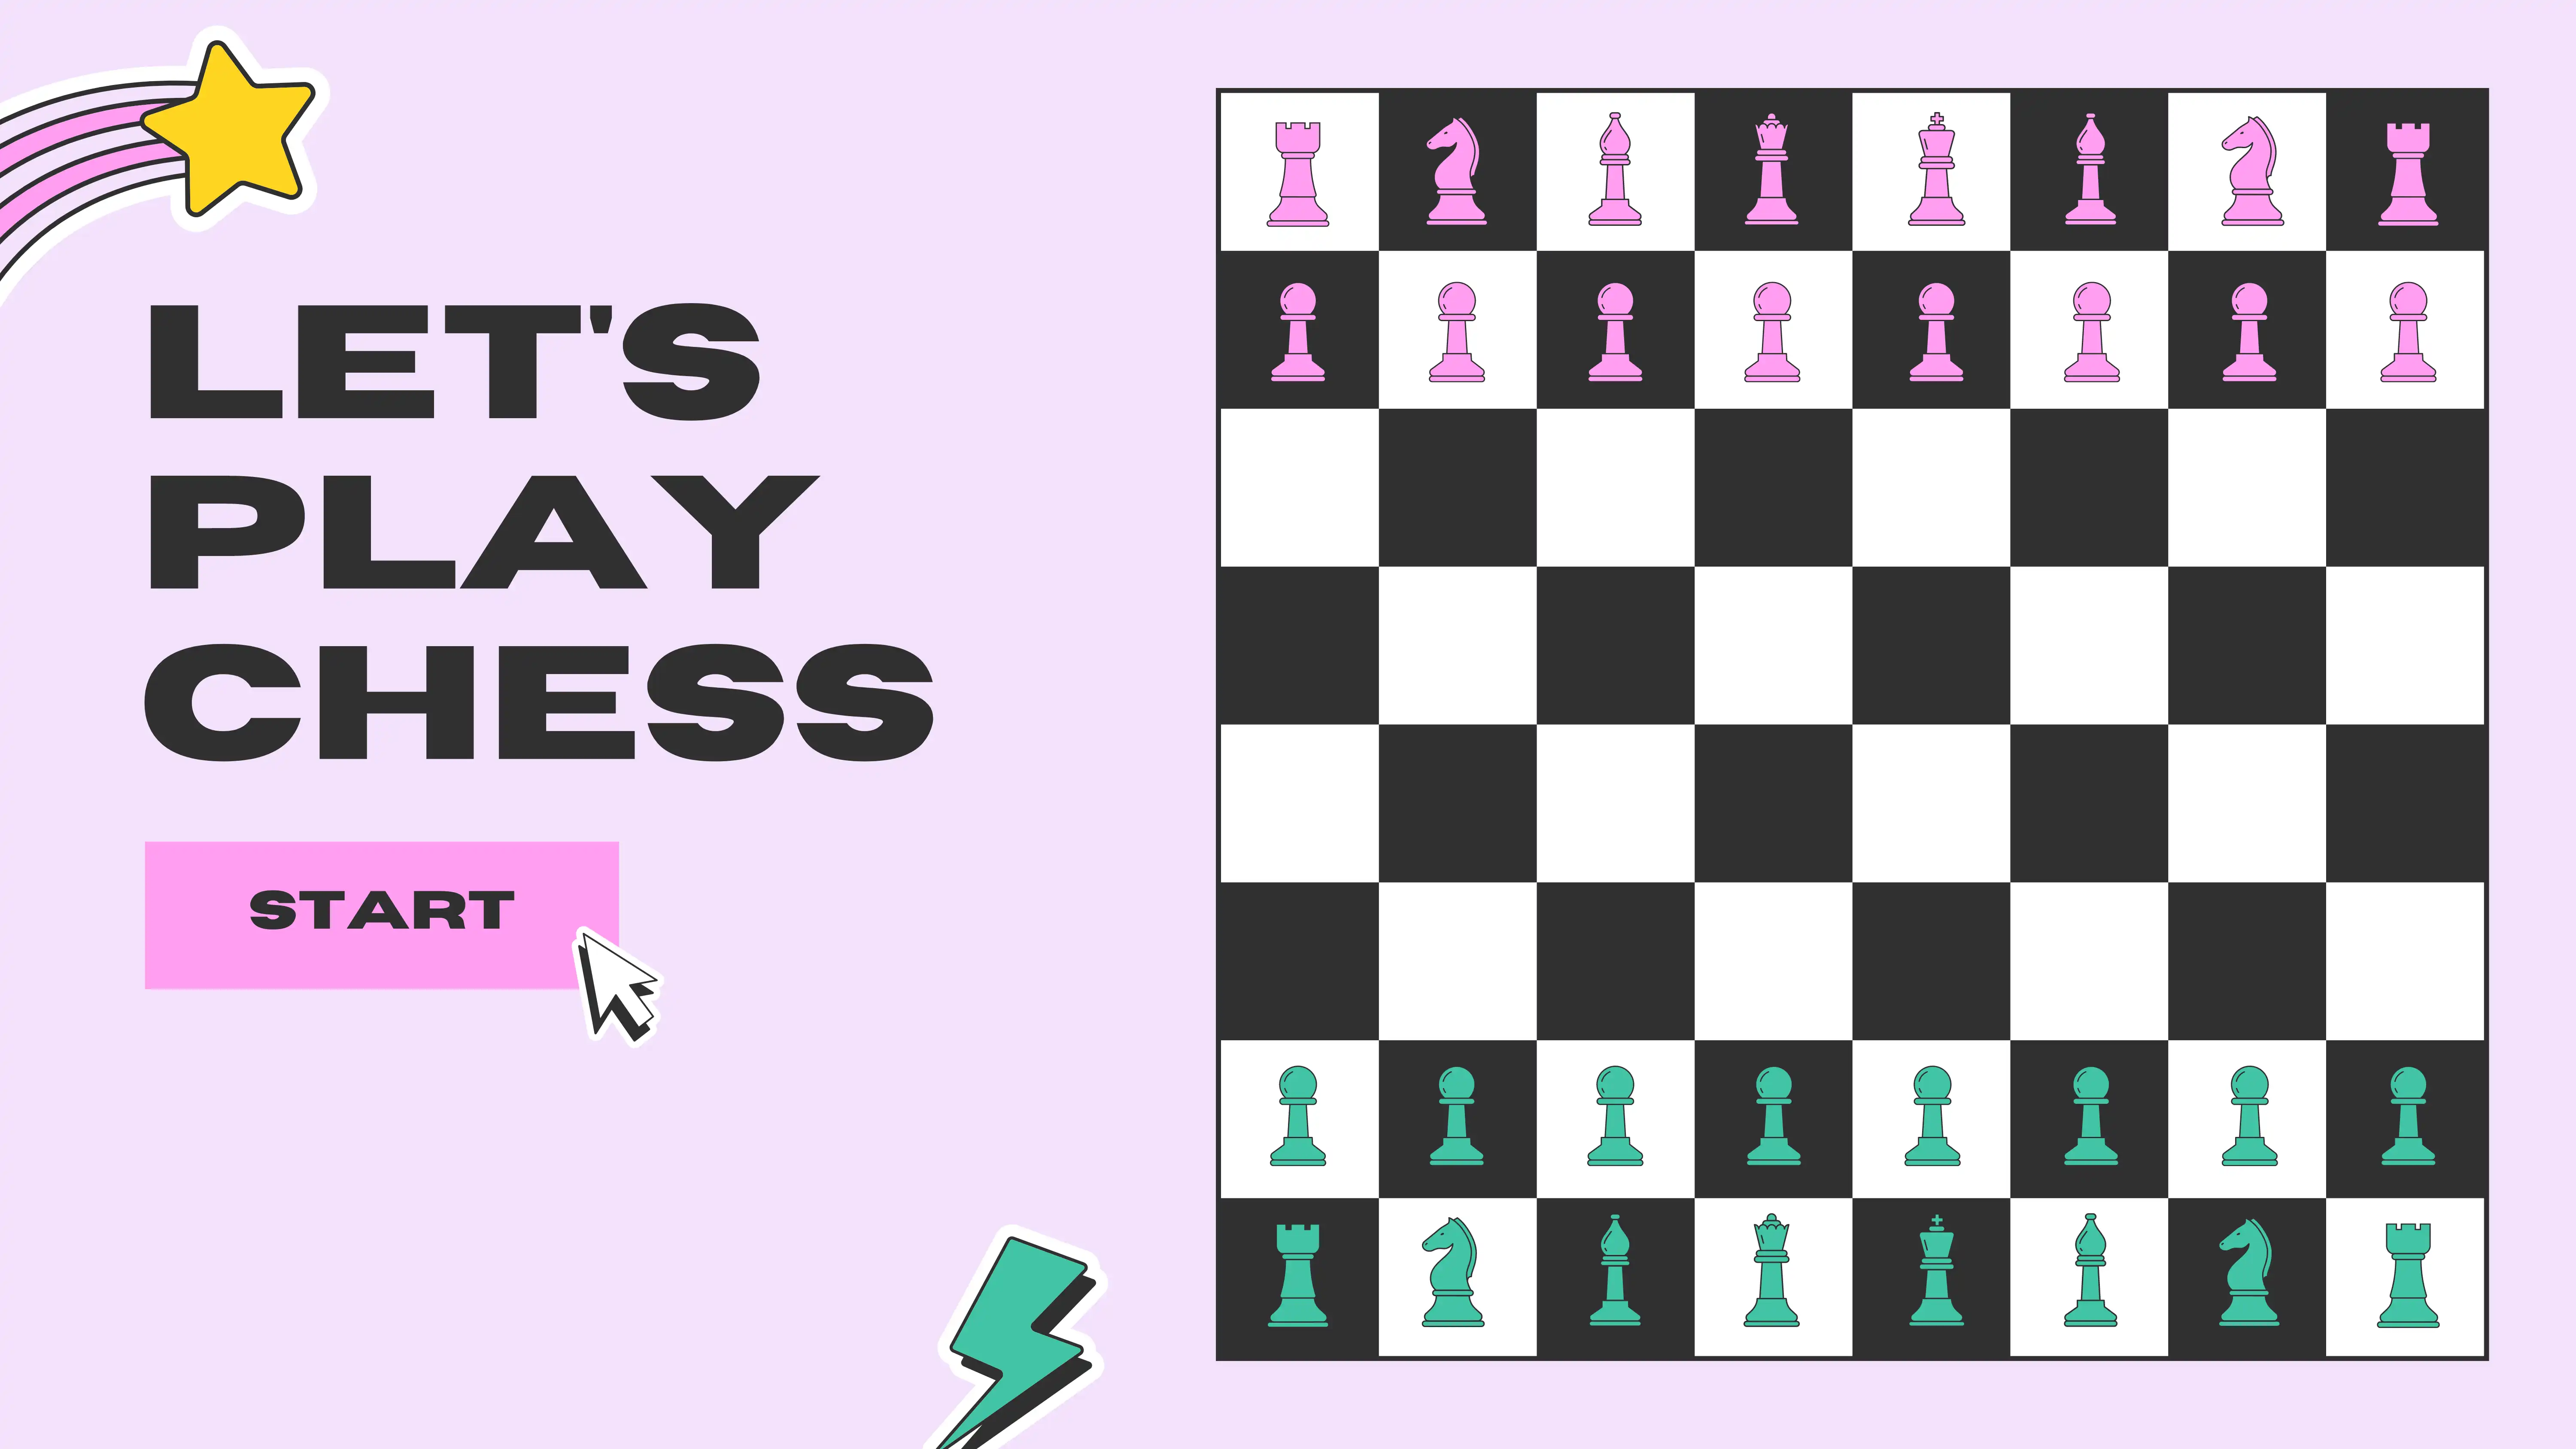 click to play chess